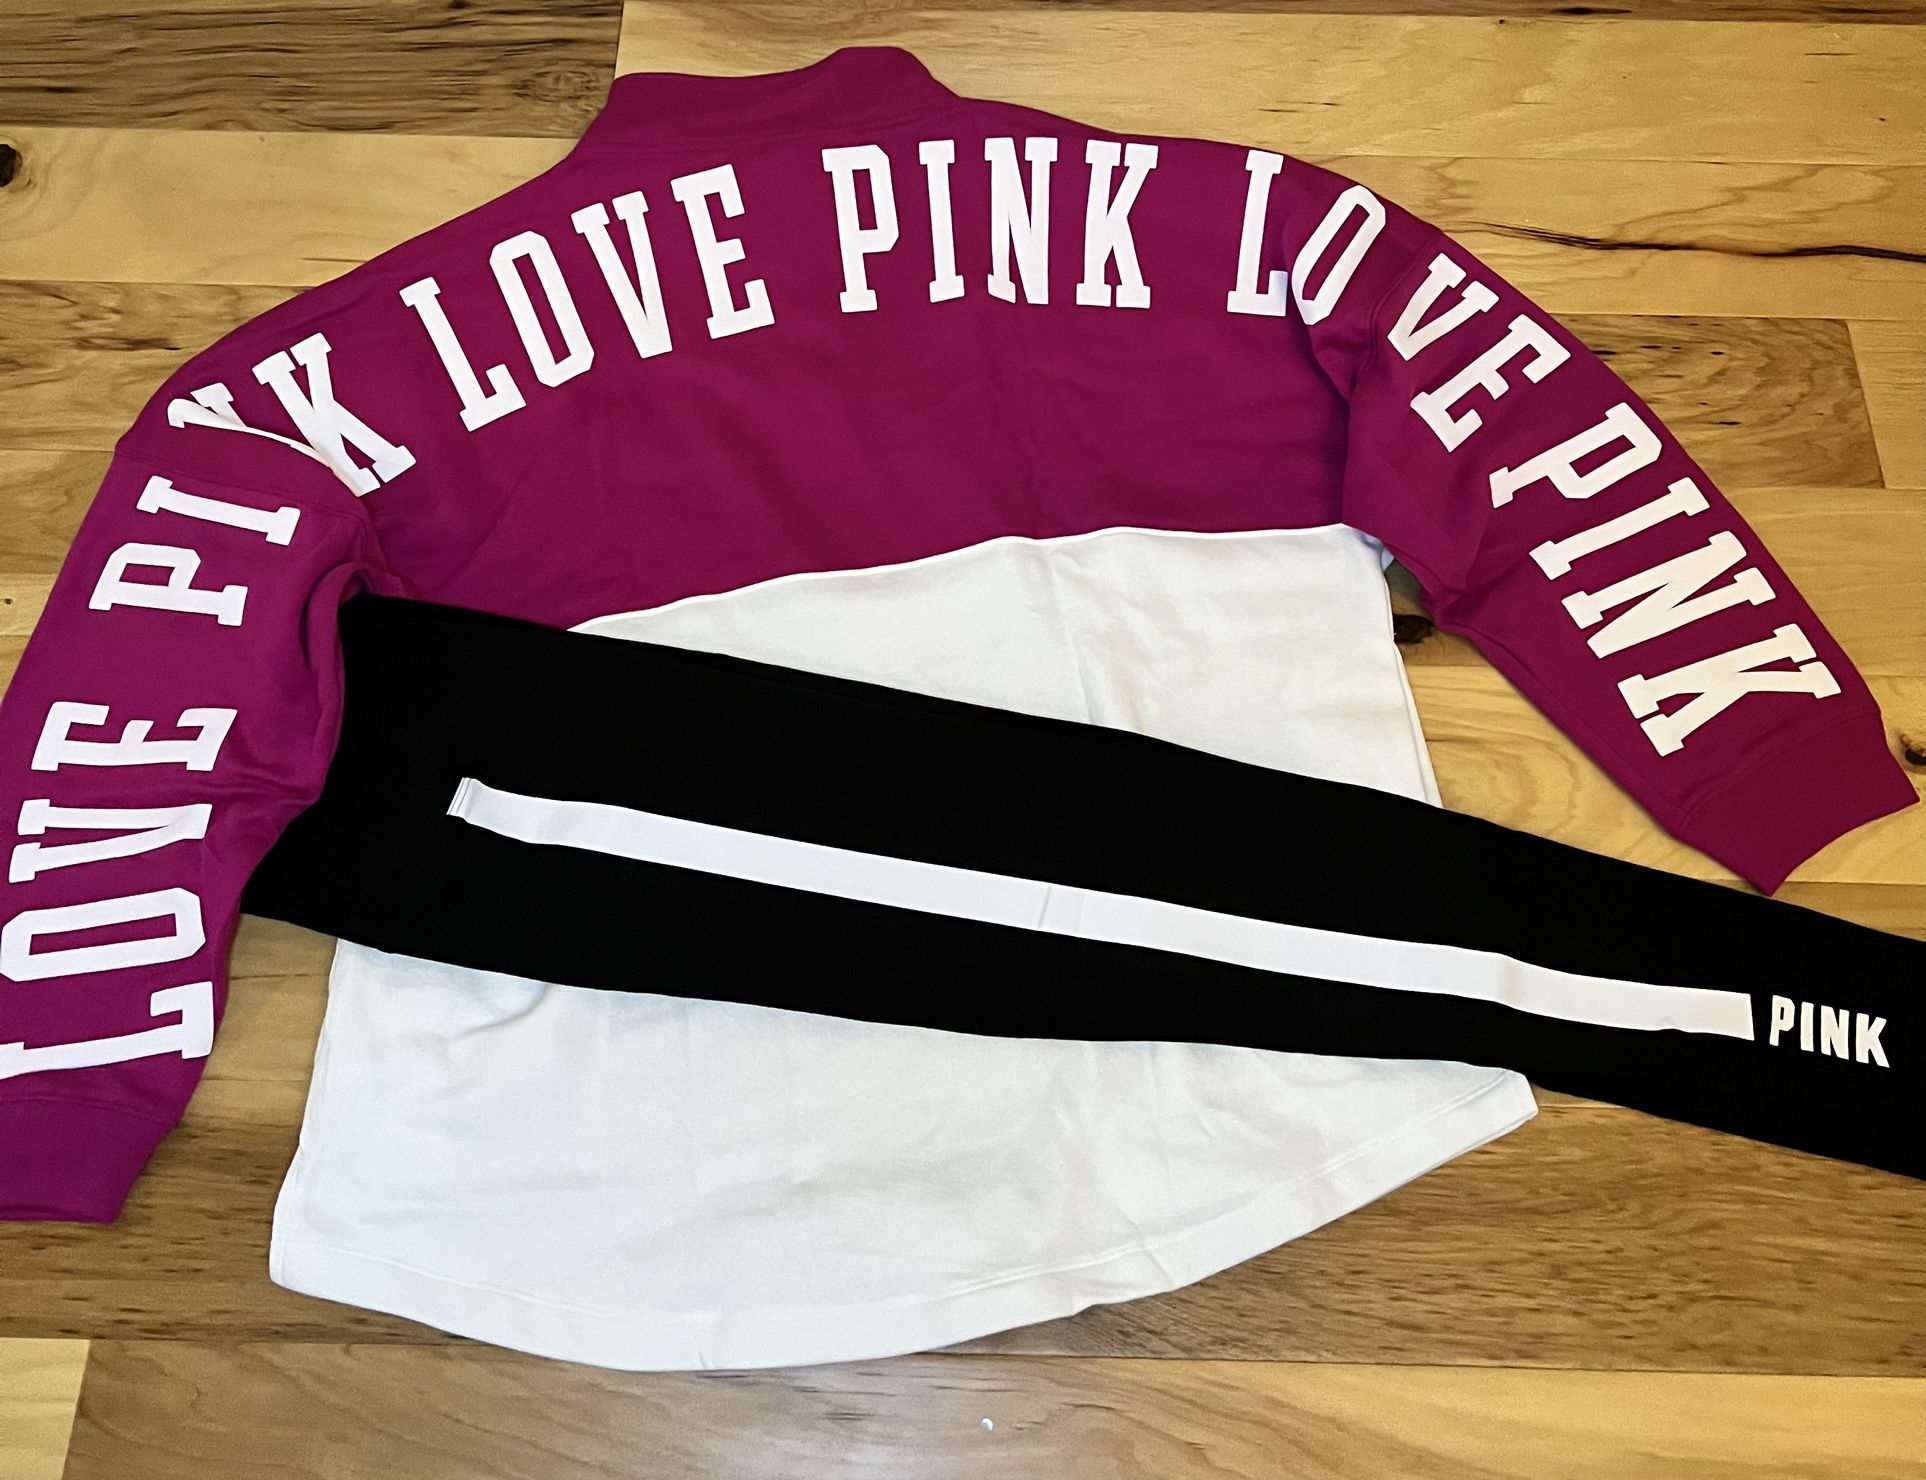 Check Out All Pics VS Pink Items